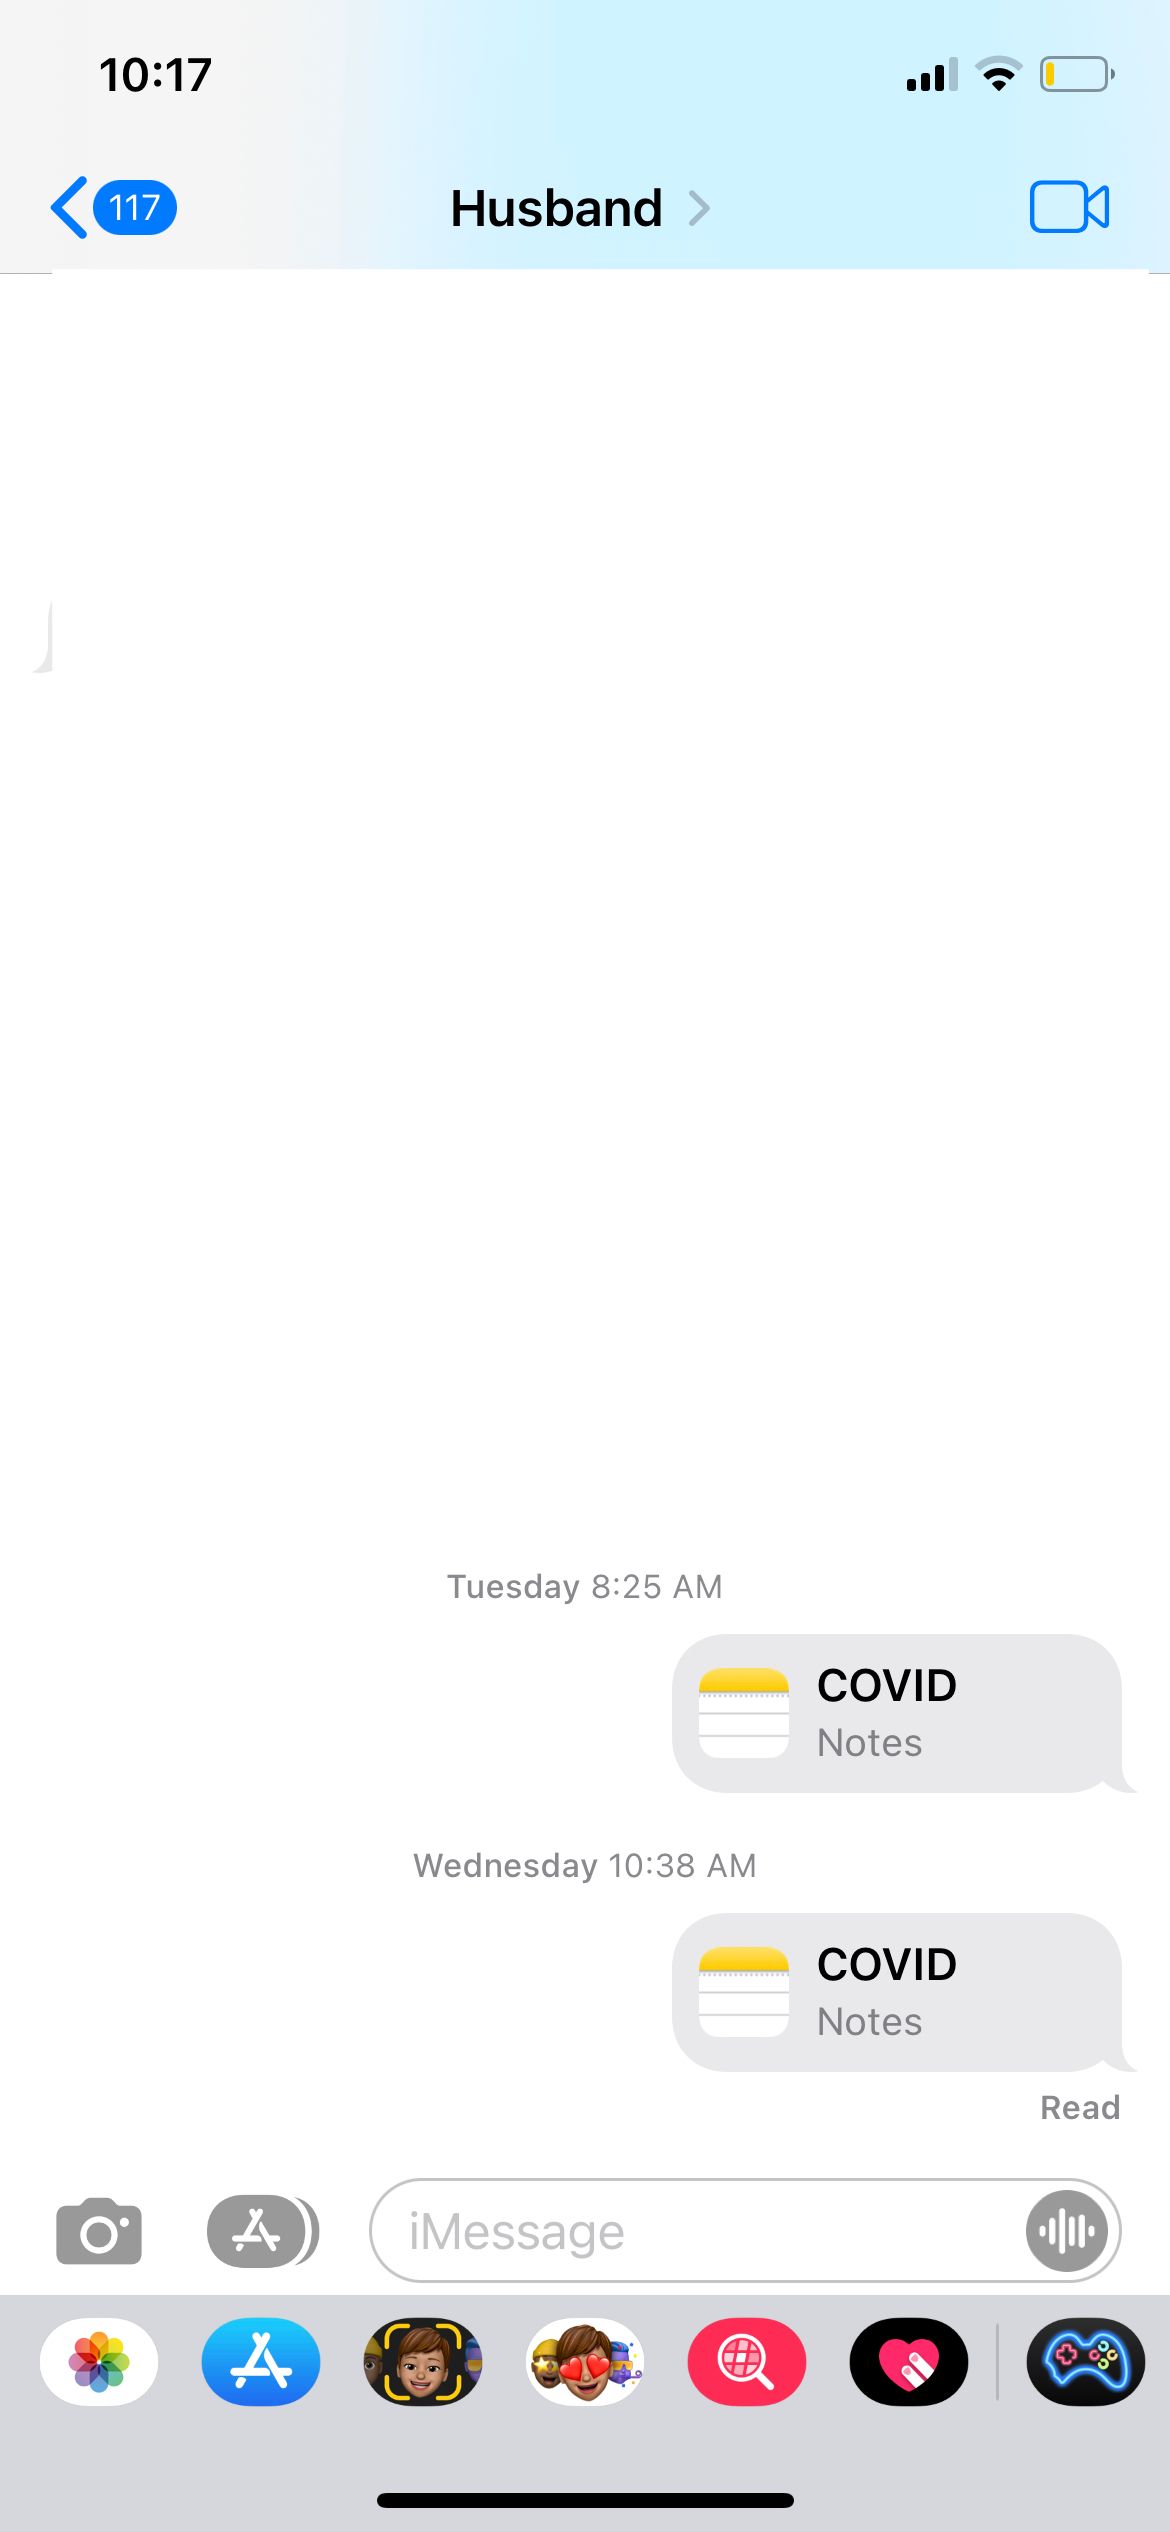 Sharing Notes Through iMessage